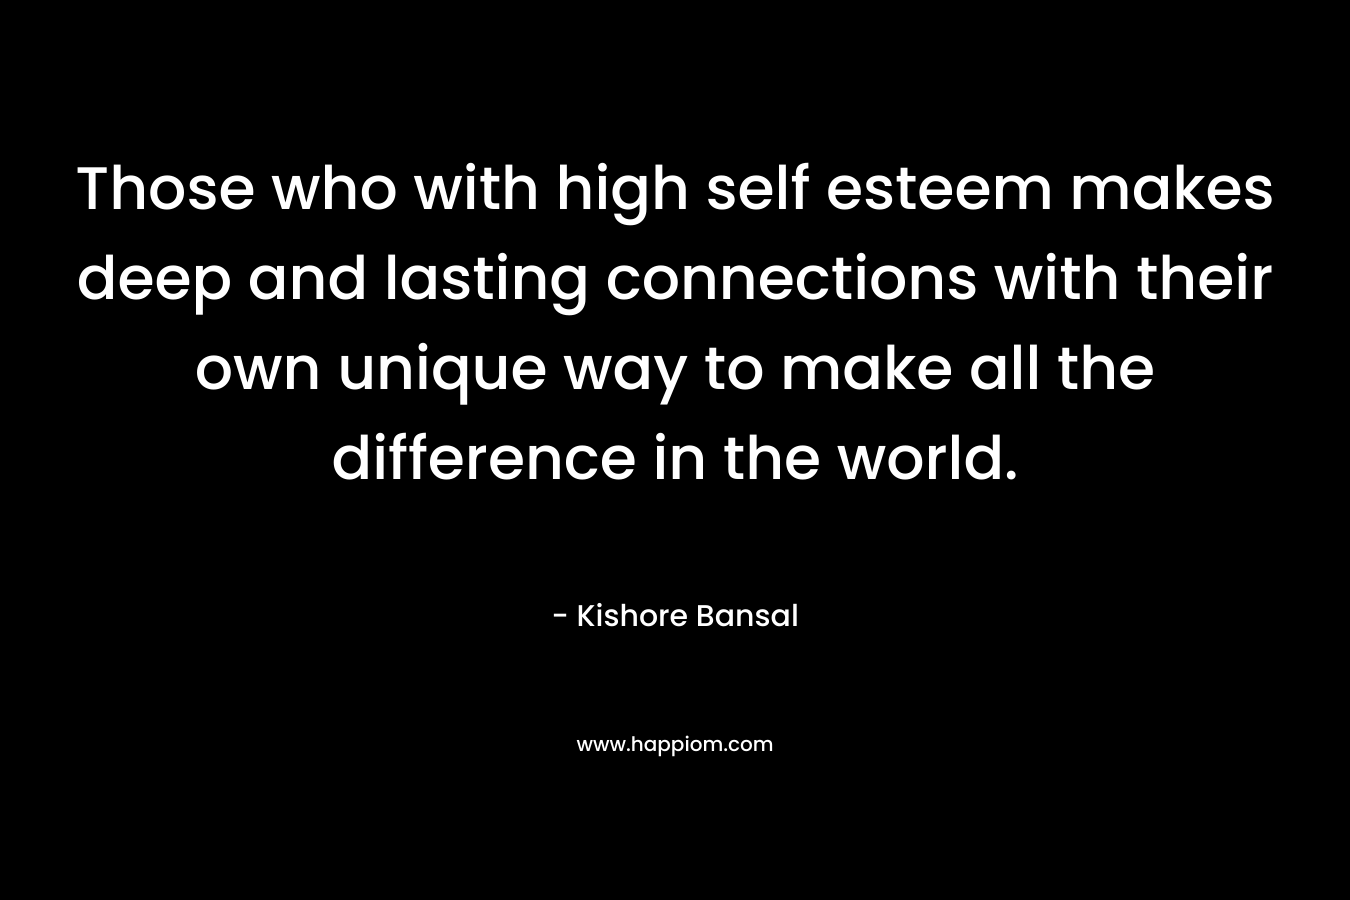 Those who with high self esteem makes deep and lasting connections with their own unique way to make all the difference in the world.